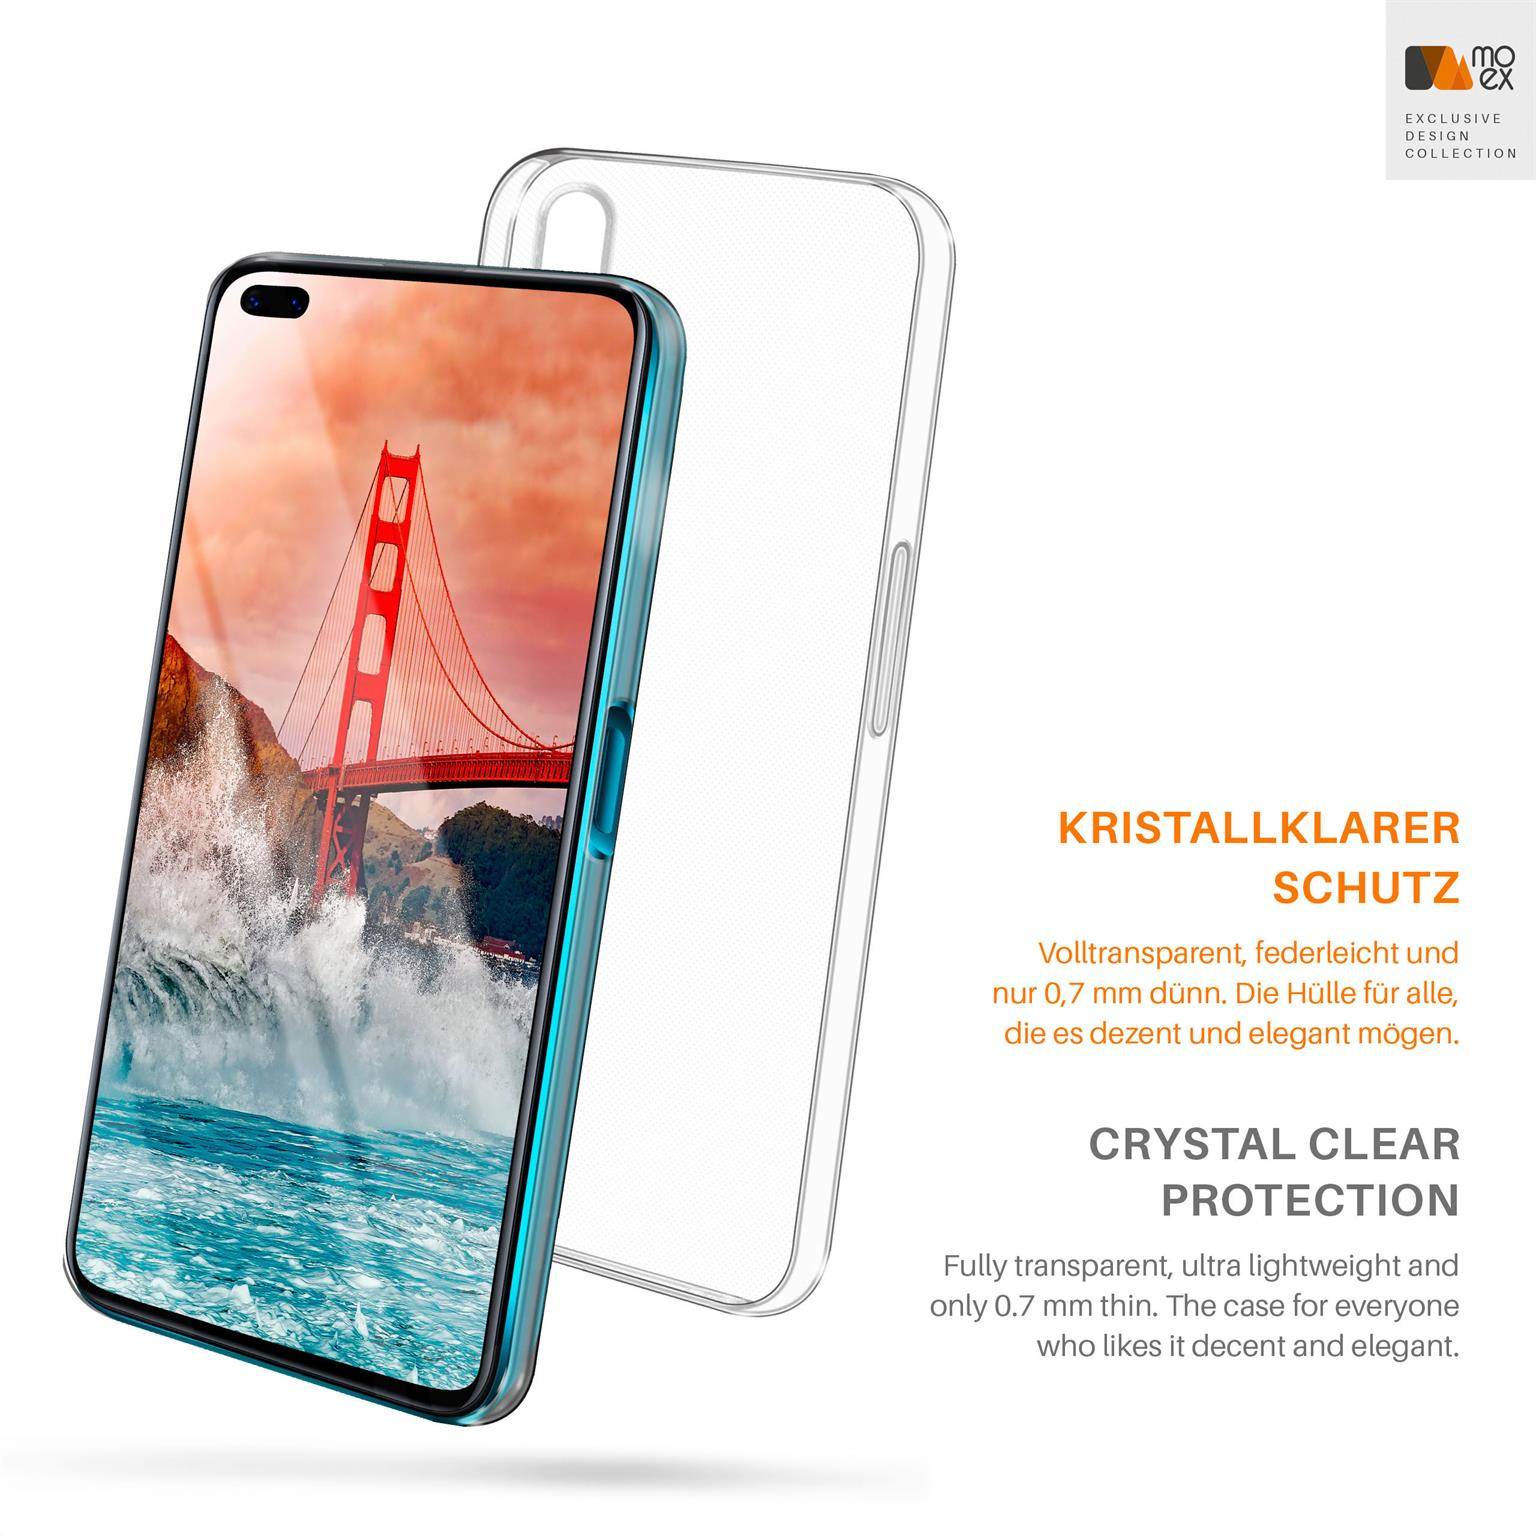 X50, Backcover, Case, Aero MOEX Realme, Crystal-Clear